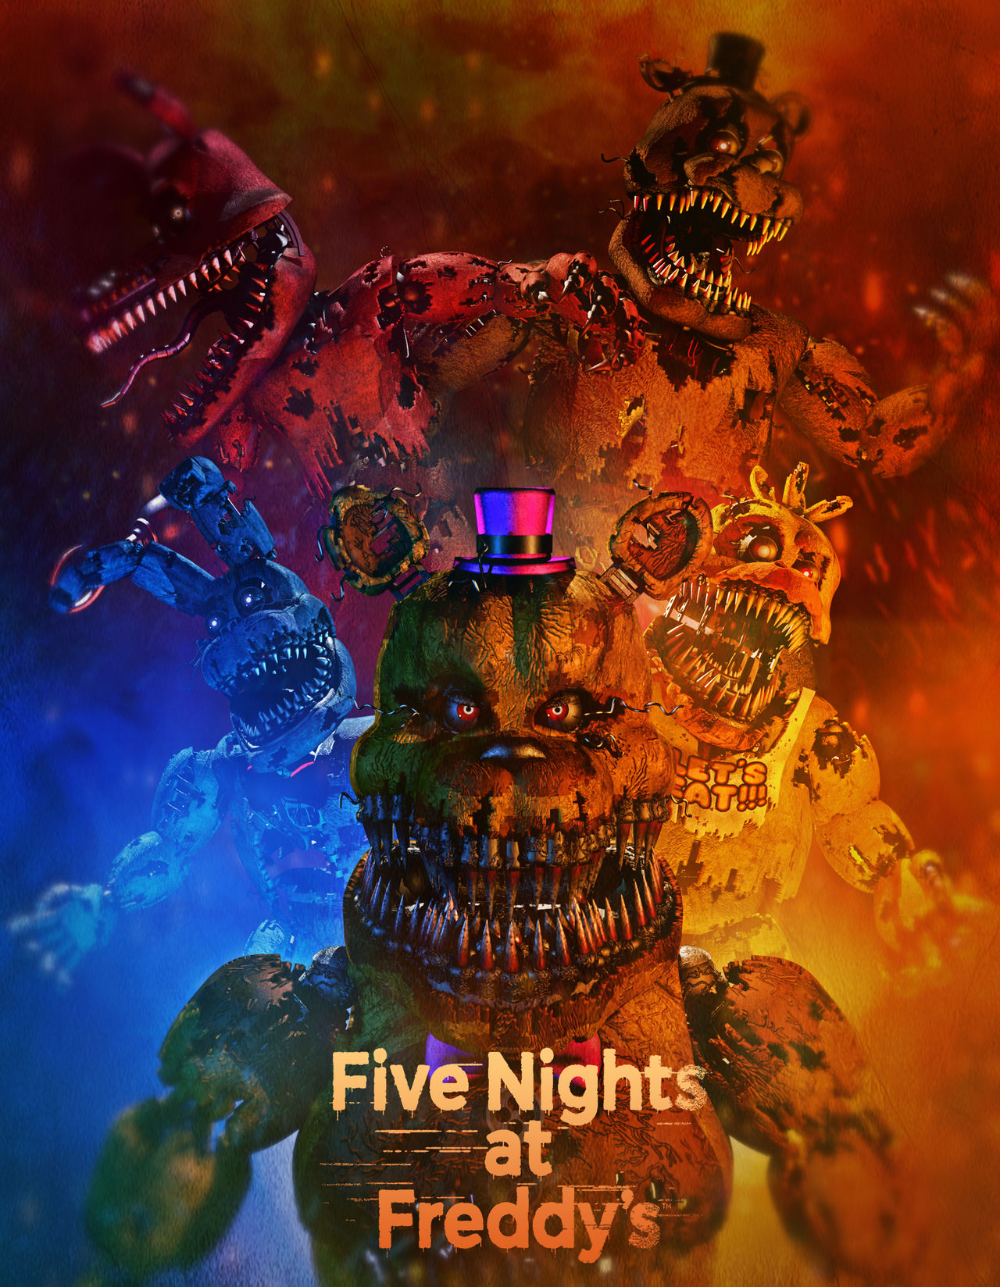 five nights at freddy's 4 movie poster (fanmade). Fainas and freddy, Imagenes de pokemon pikachu, Fnaf dibujos